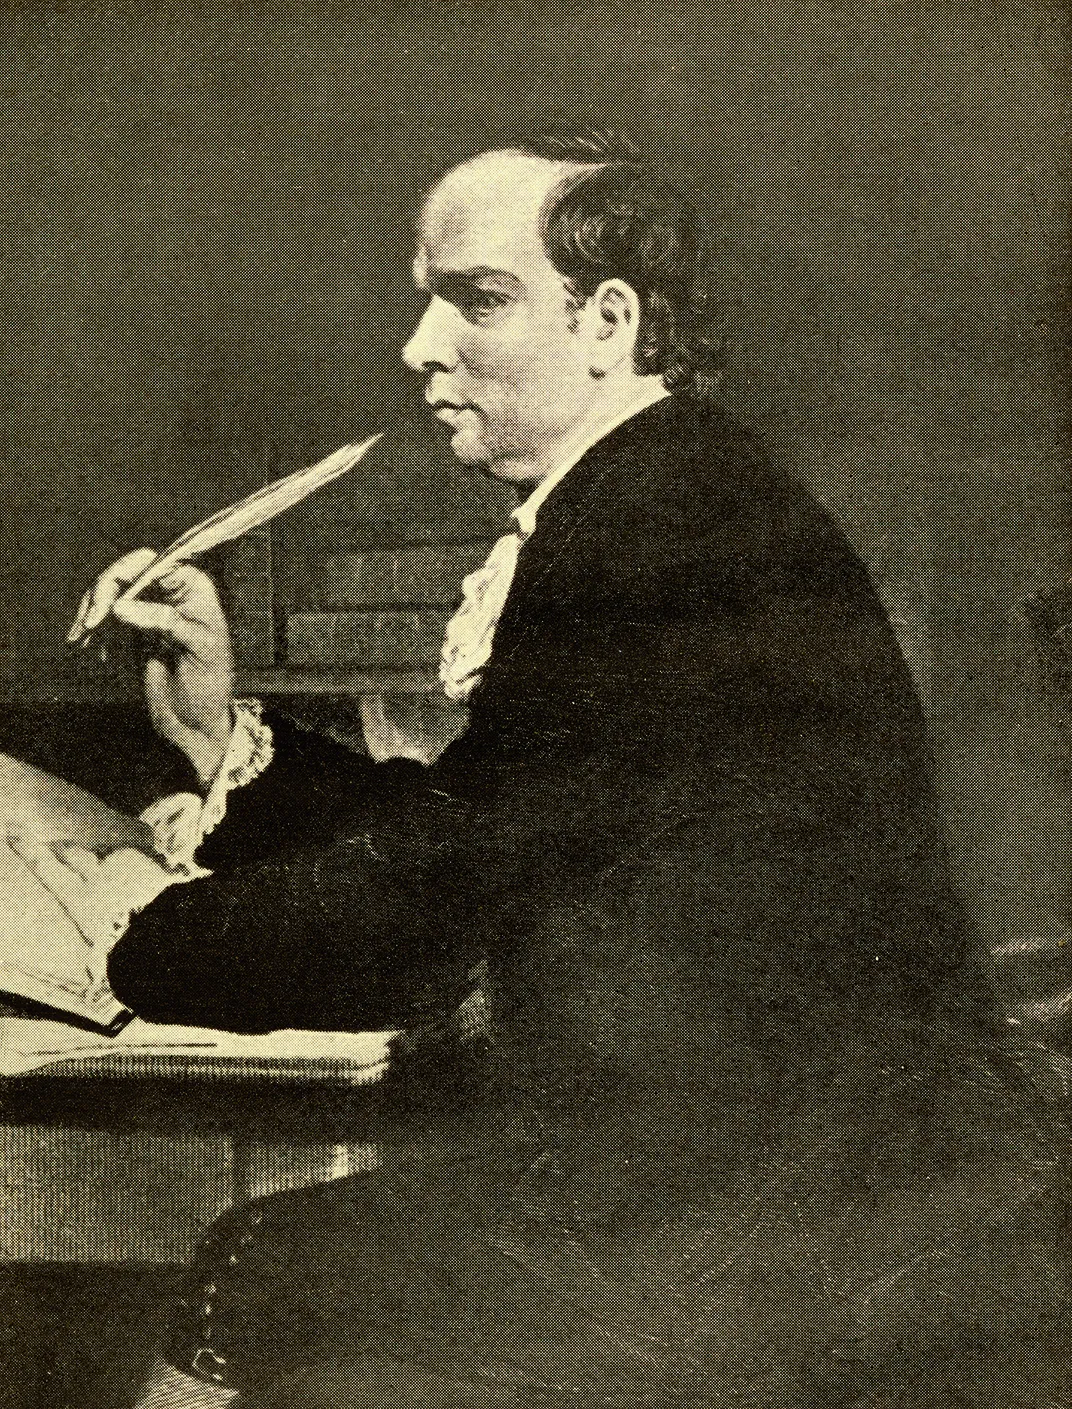 a black and white portrait of a man at a desk writing